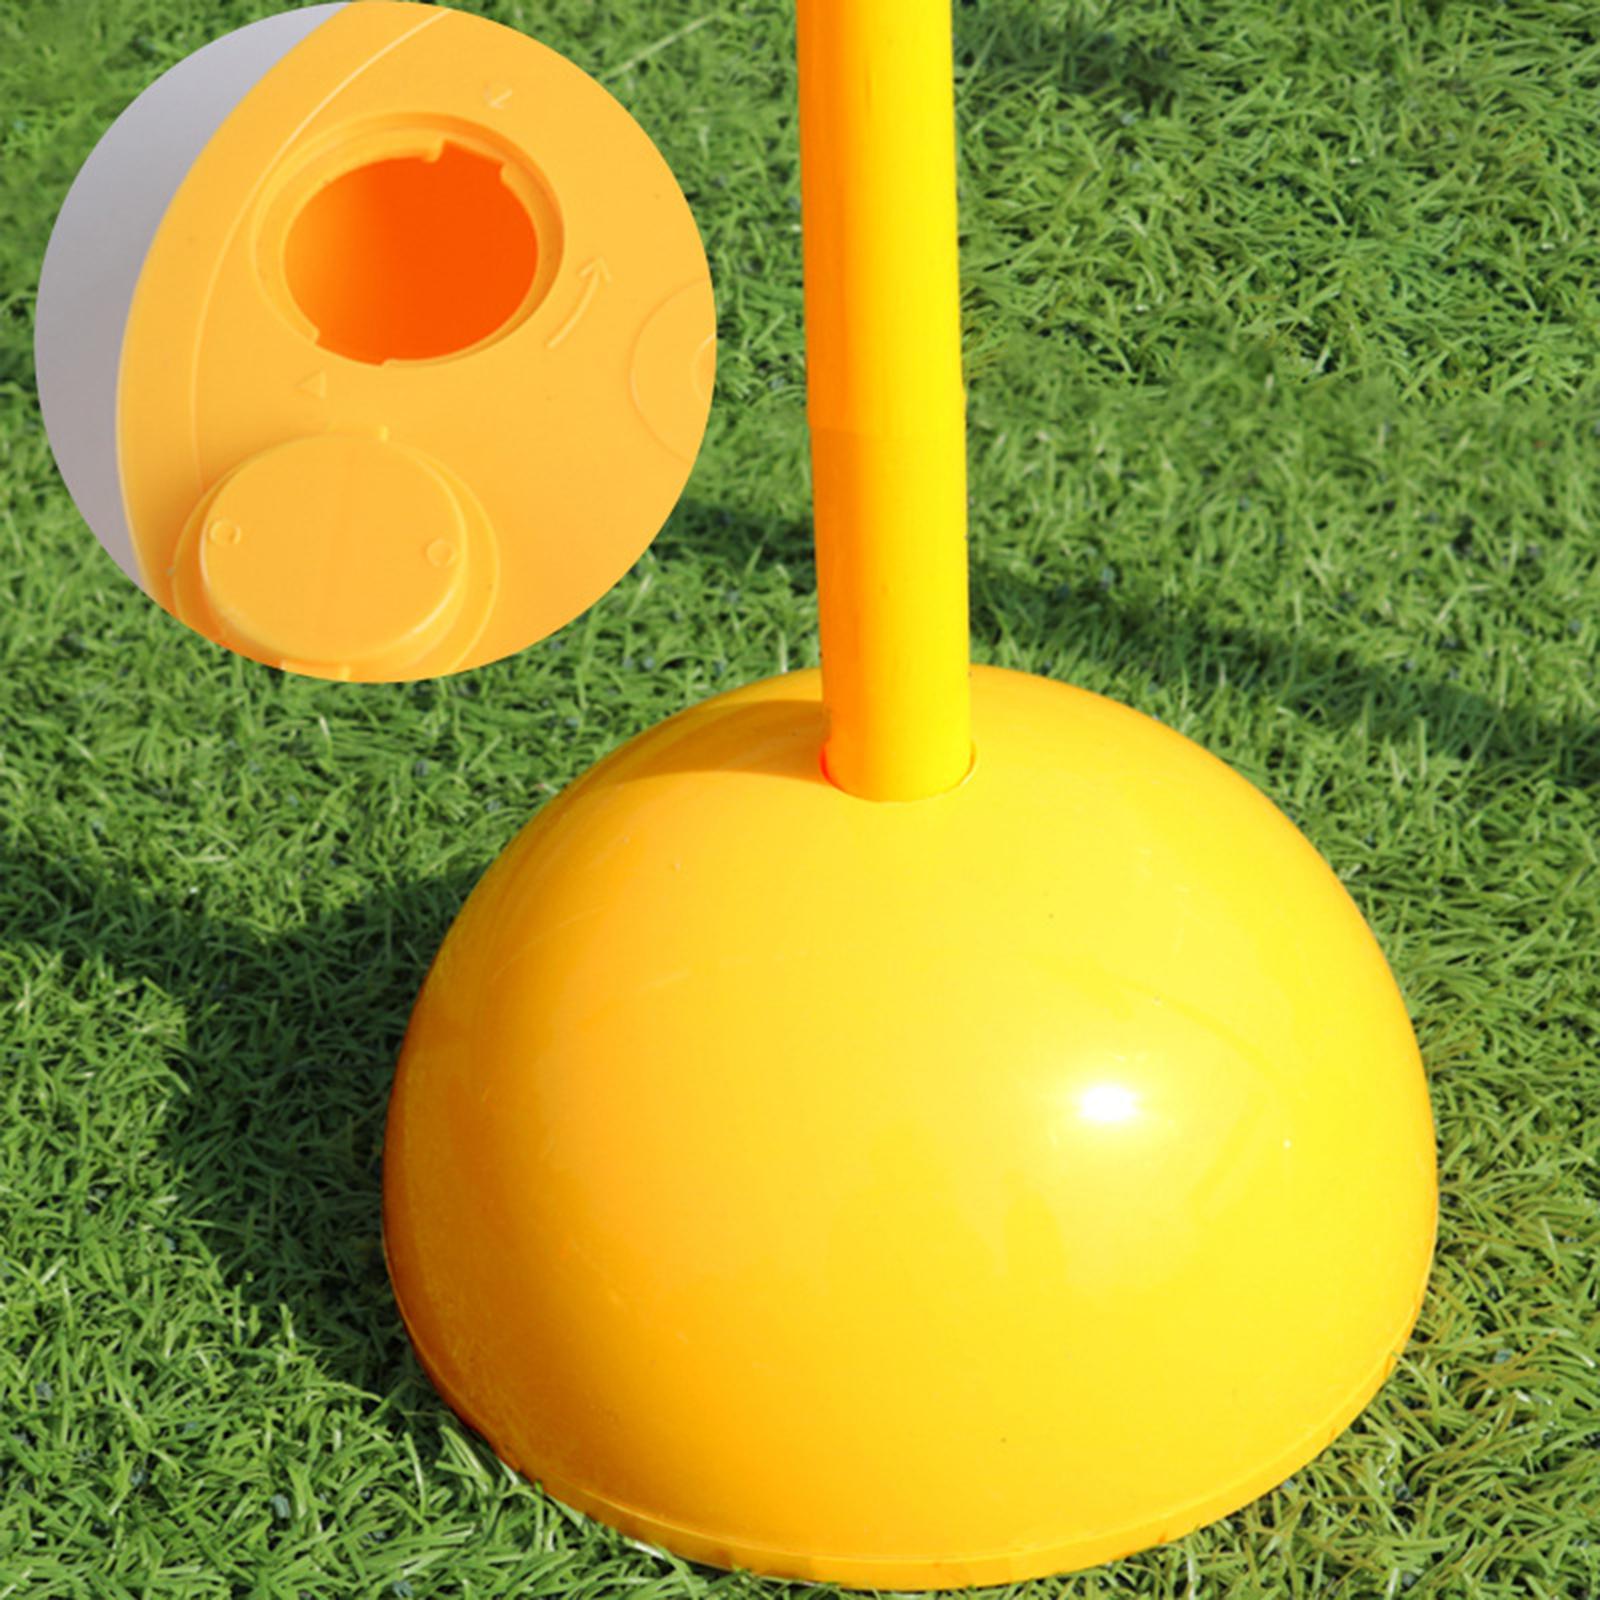 Football Door Pole Training Tool Sign Obstacle Marker Rod 2 Pieces Sign pole